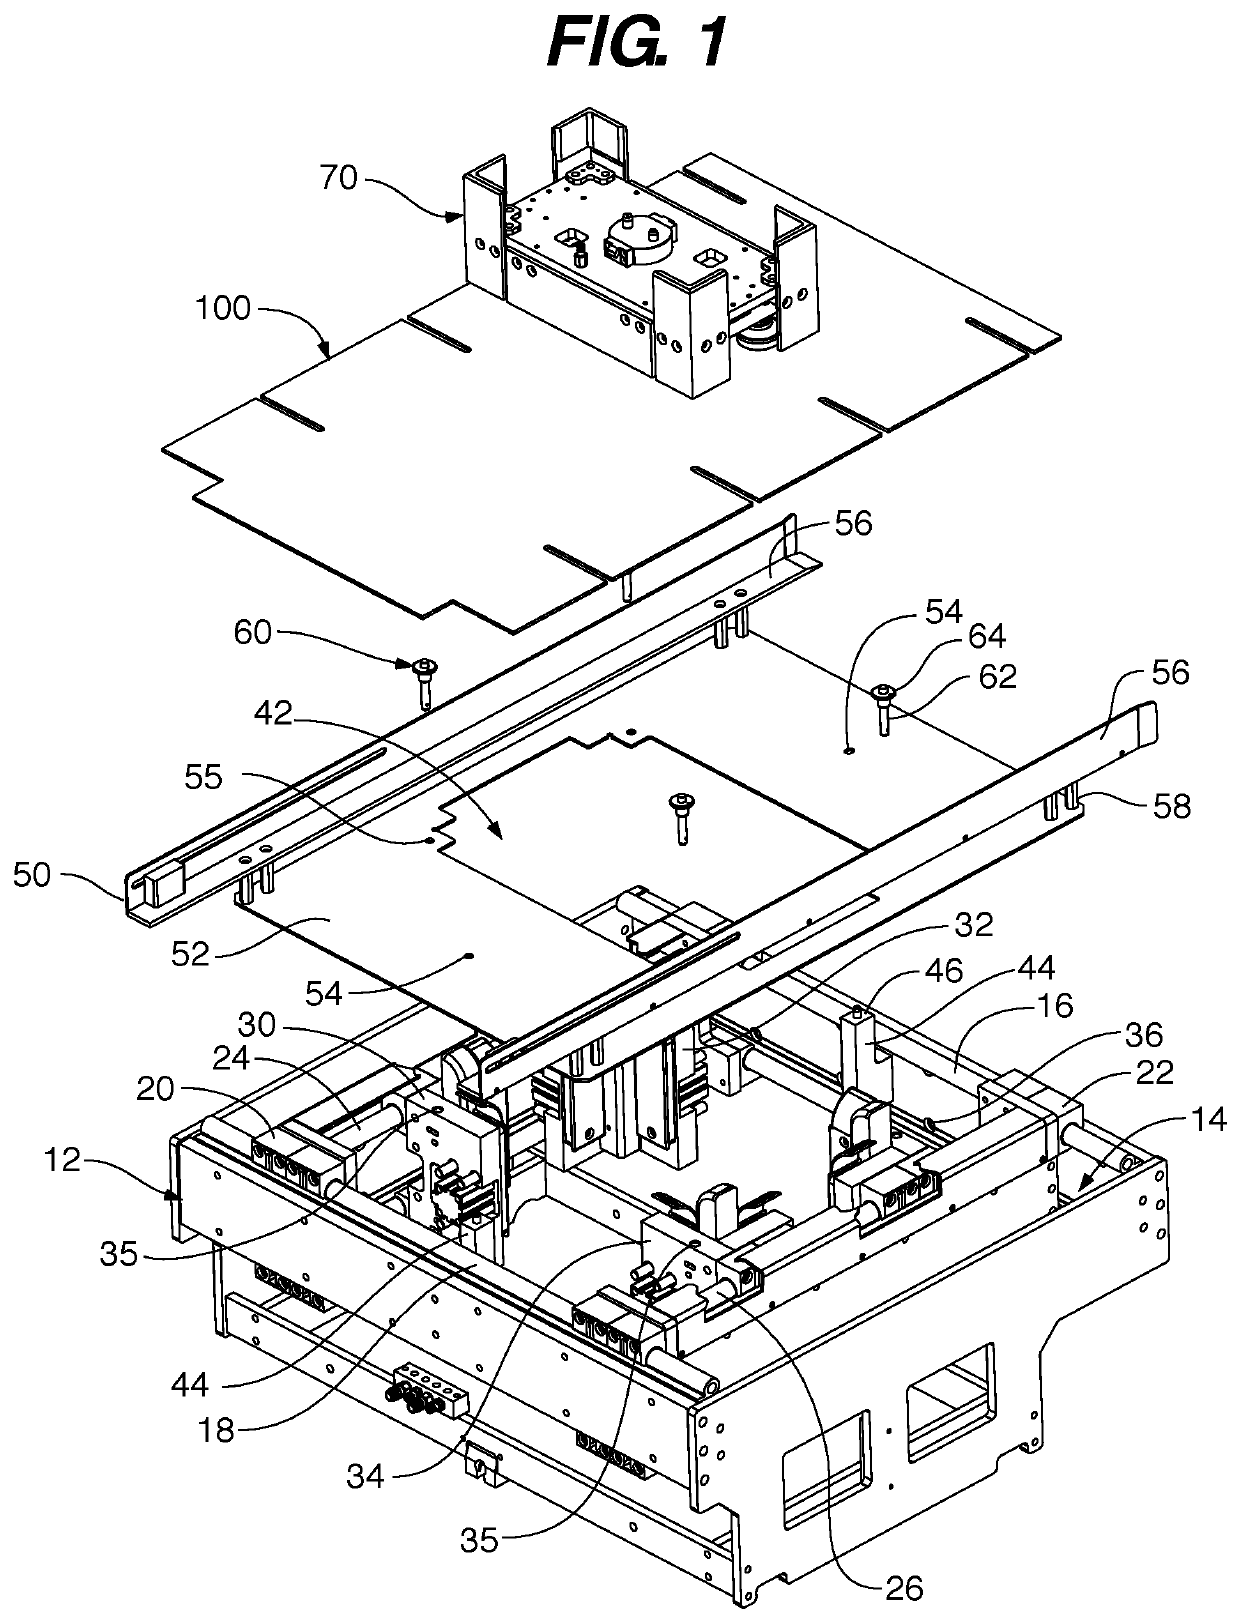 Adaptable tooling methods, system and apparatuses